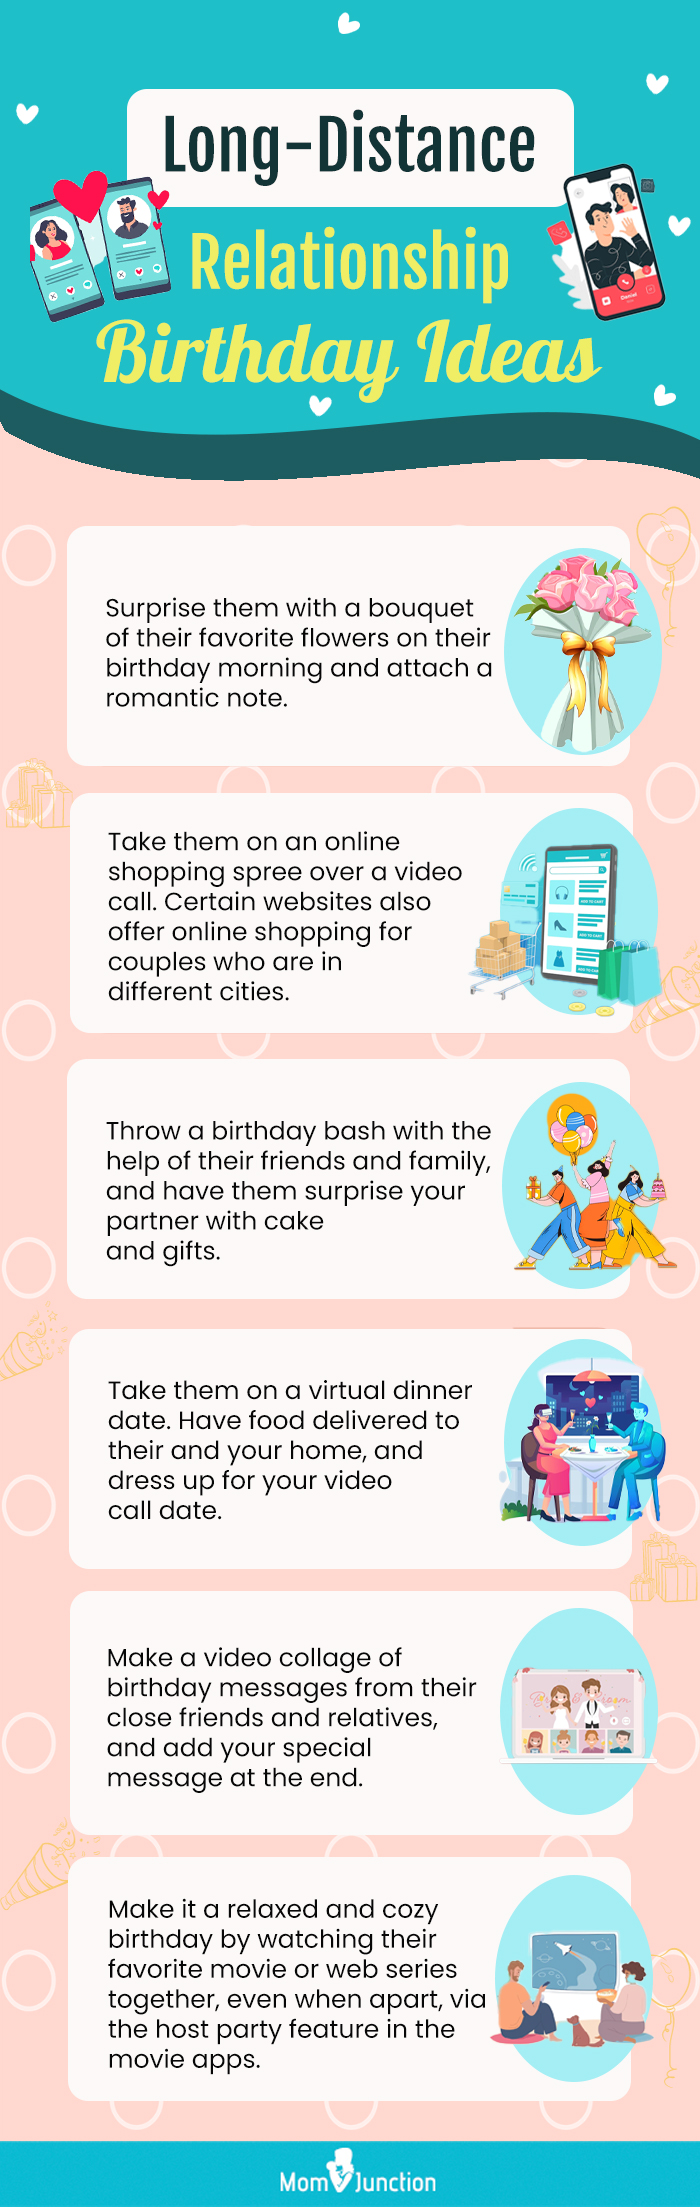 long distance relationship birthday ideas (infographic)